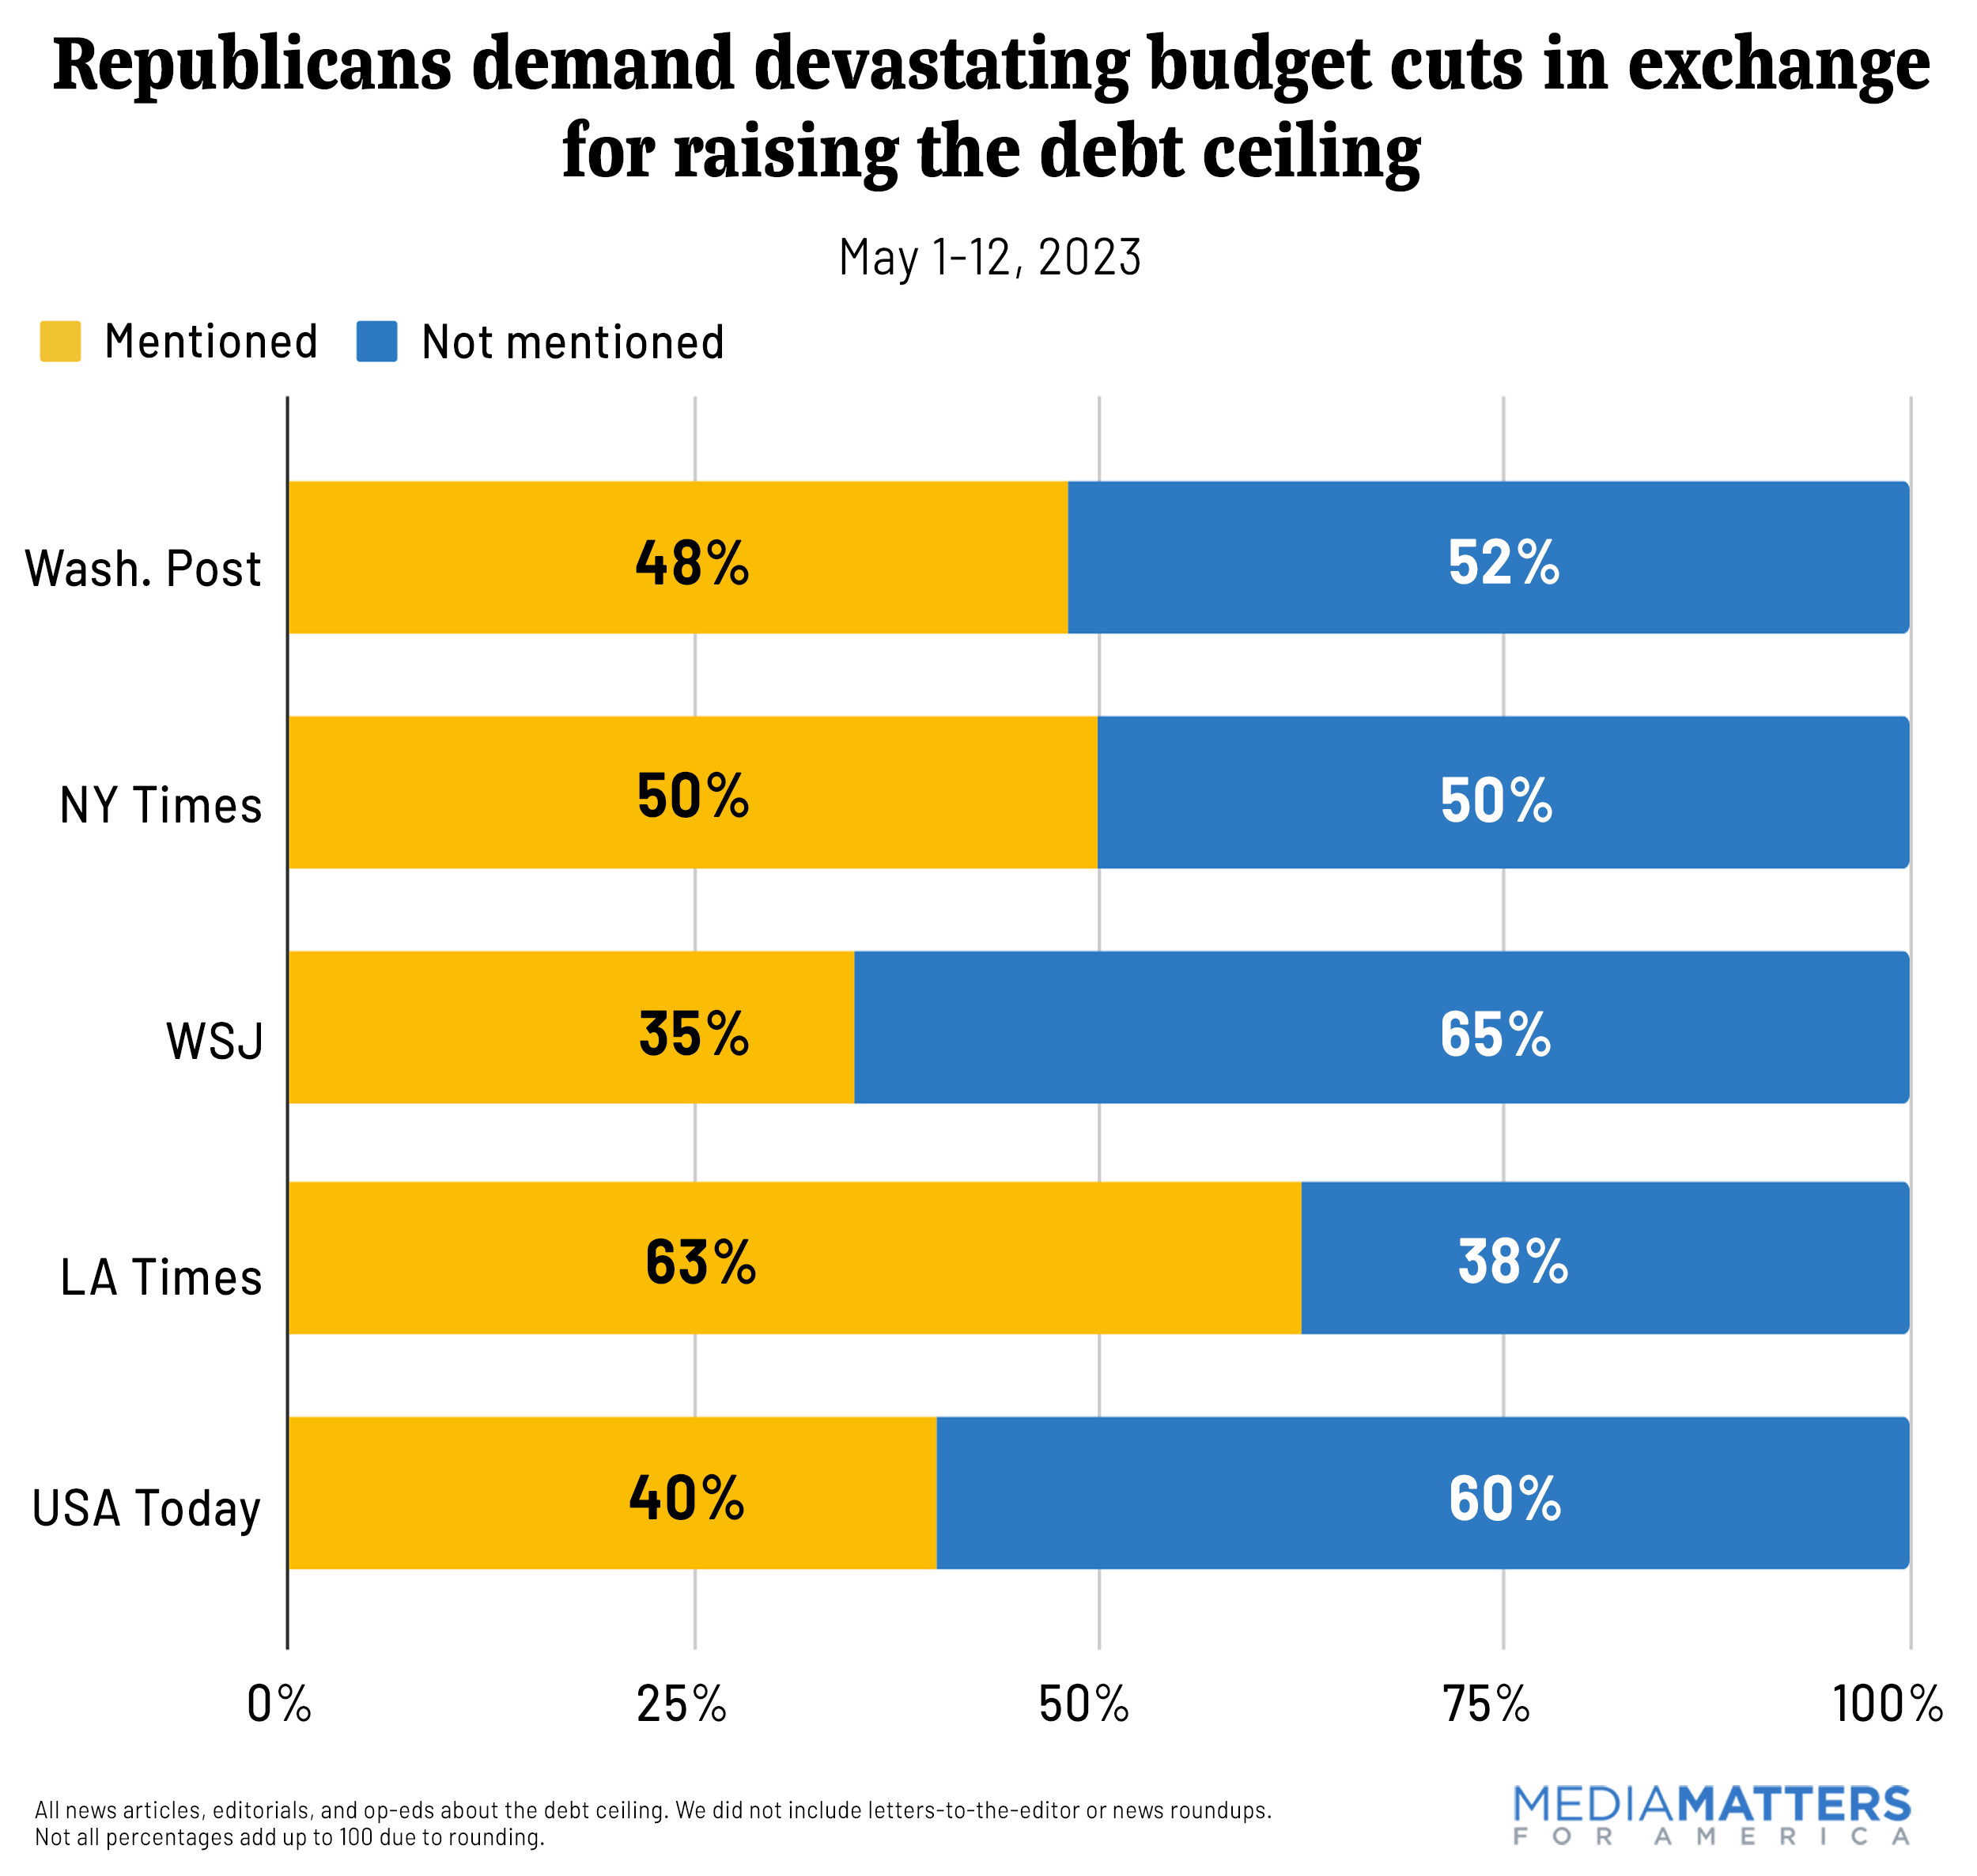 Republicans demand devastating budget cuts in exchange for raising the debt ceiling